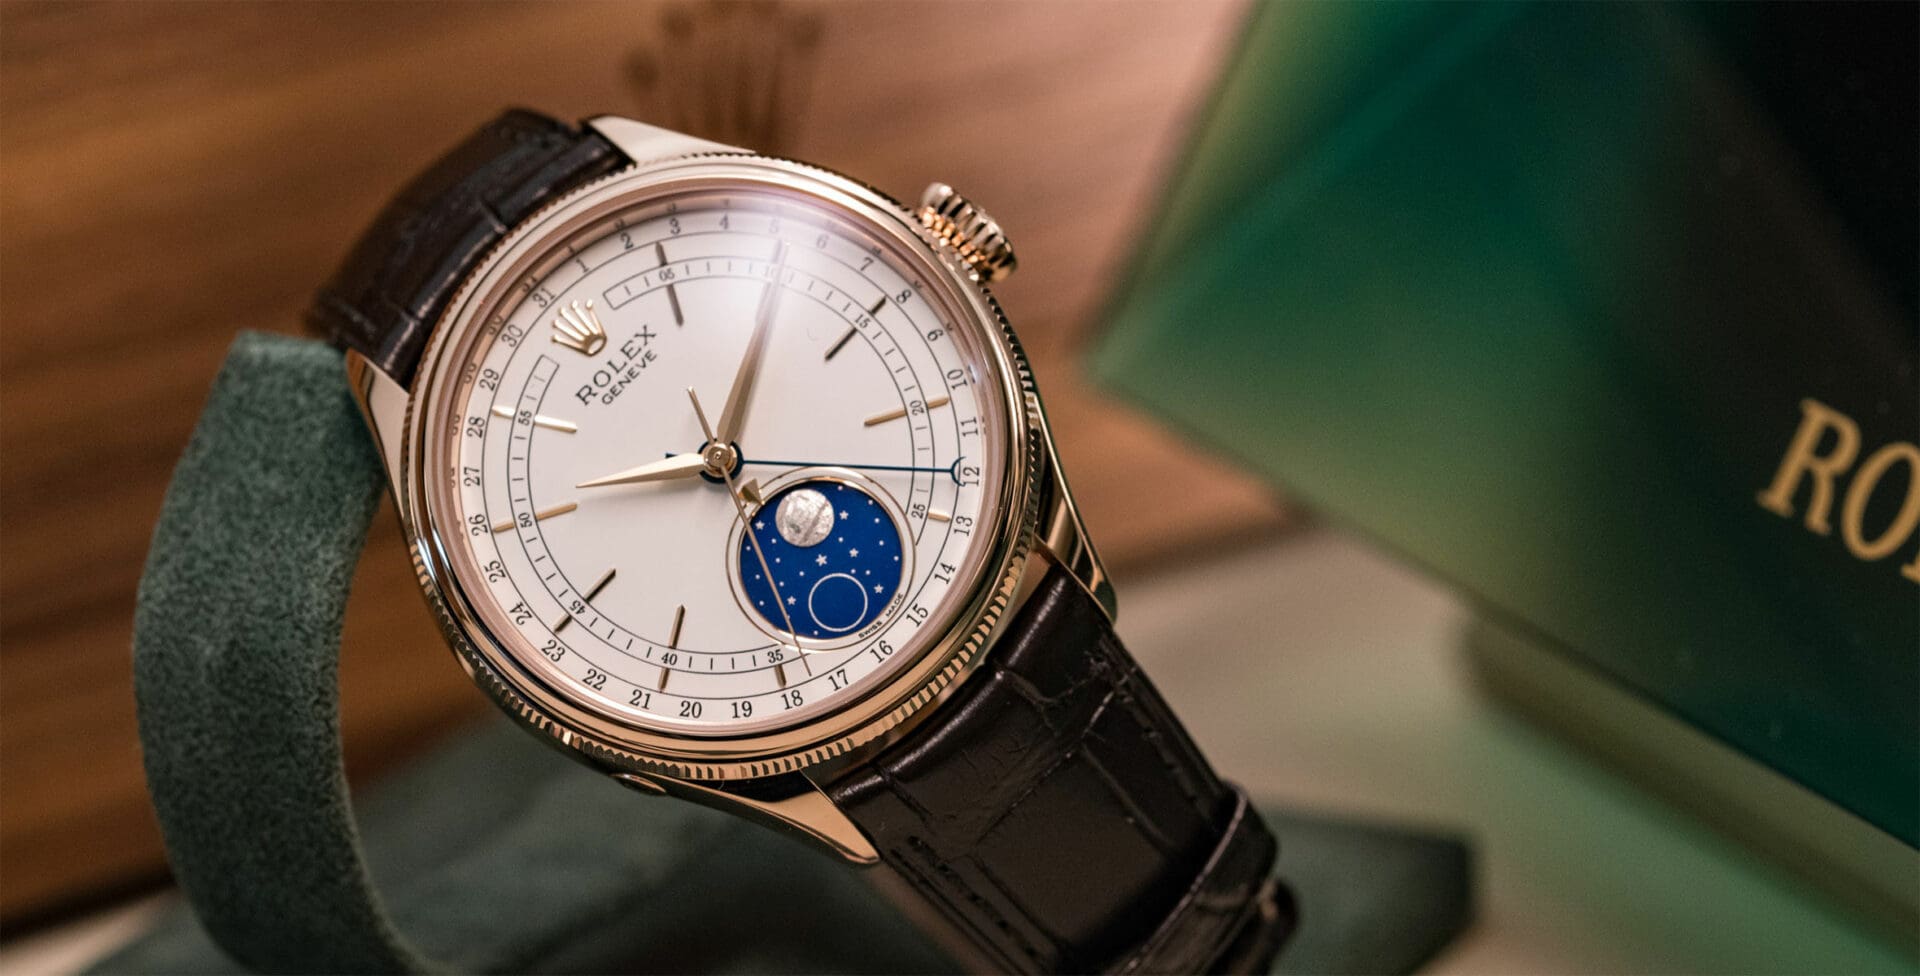 HANDS-ON: The Rolex Cellini Moonphase – what it is and why it matters